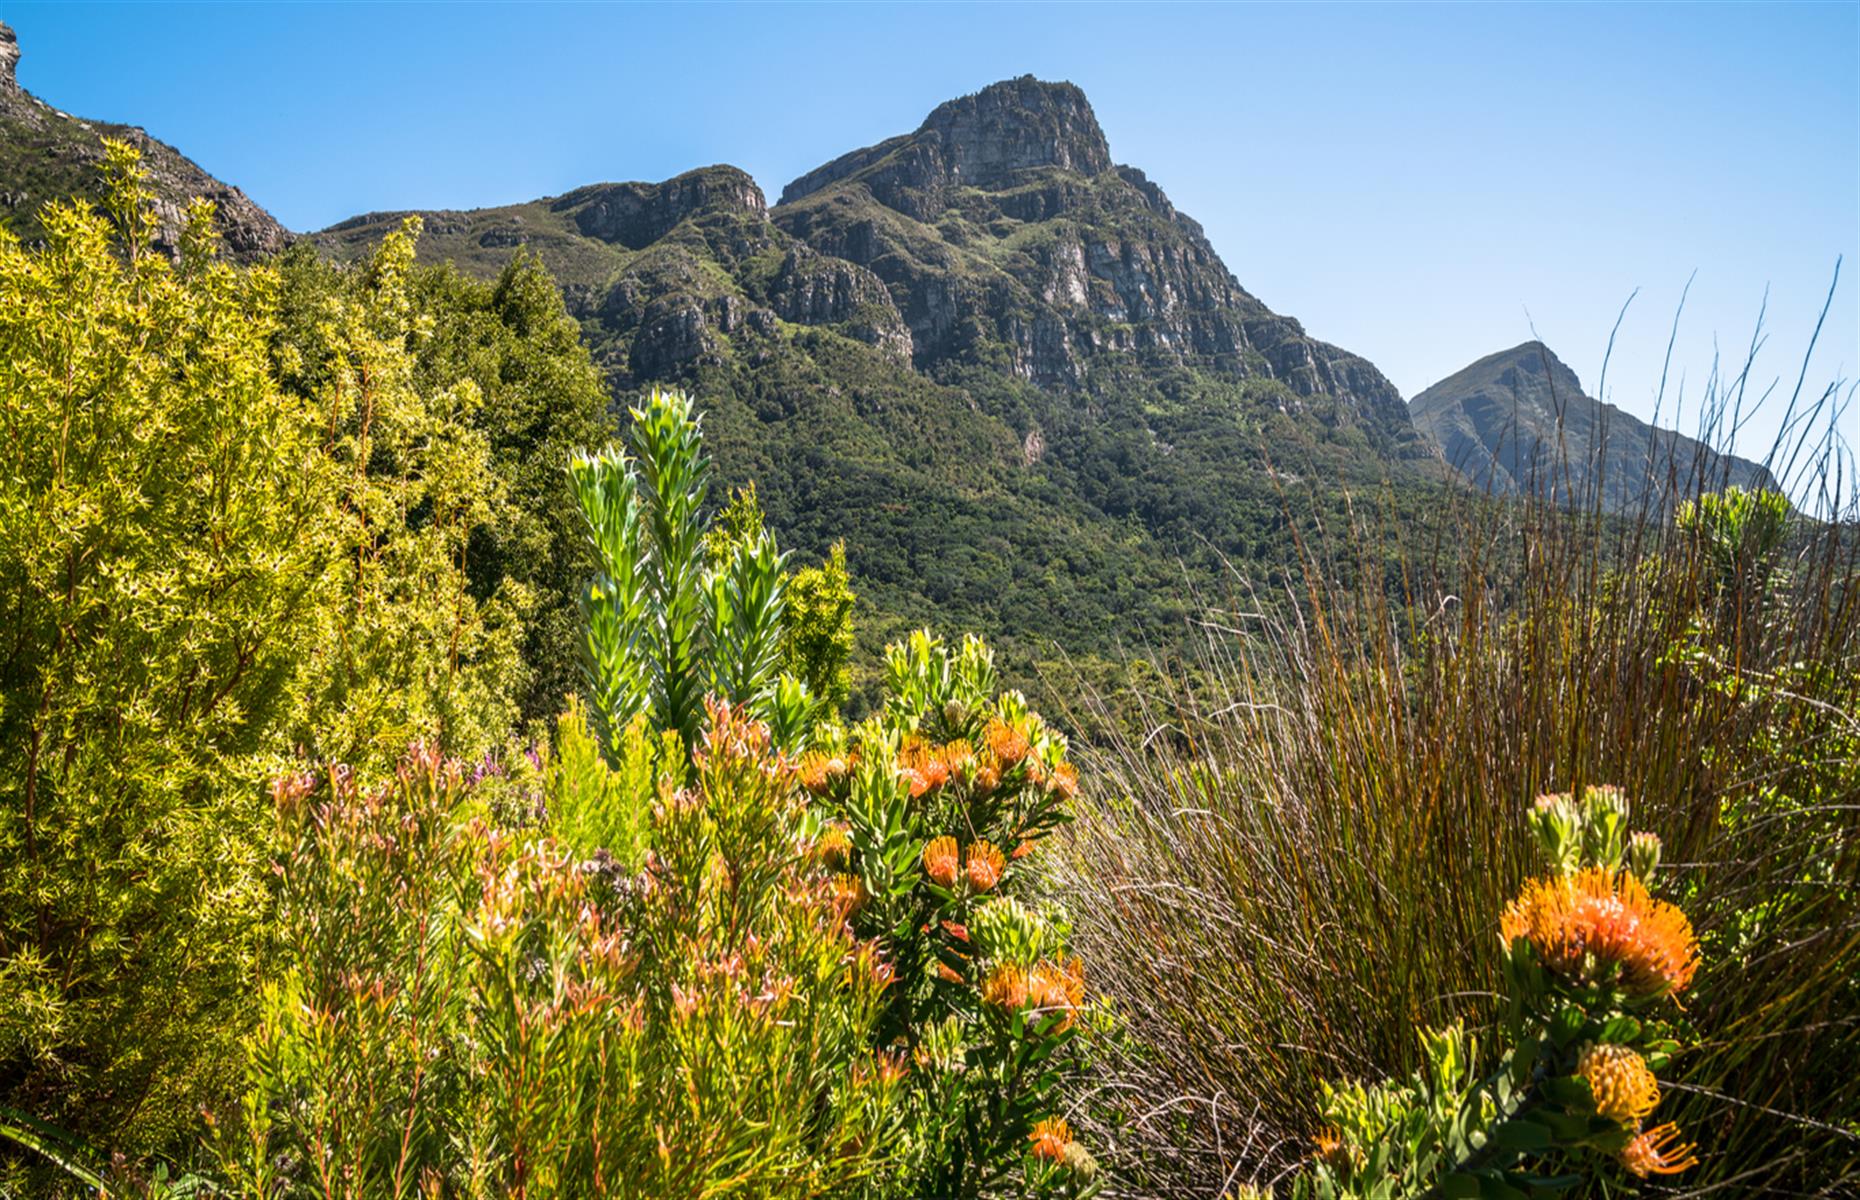 <p>Rising temperatures and droughts are likely to affect one of the most biologically diverse regions on Earth – South Africa’s Cape Floral Region. The vast swathe of protected land, which covers 2.5 million acres, includes Table Mountain, Garden Route National Parks and Kirstenbosch National Botanical Garden. At least 30% of its plant species are not found anywhere else on the planet but with hotter temperatures and increased incidences of fires, the region’s wildflowers could cease to exist.</p>  <p><strong>Liking this? Click on the Follow button above for more great stories from loveEXPLORING</strong></p>